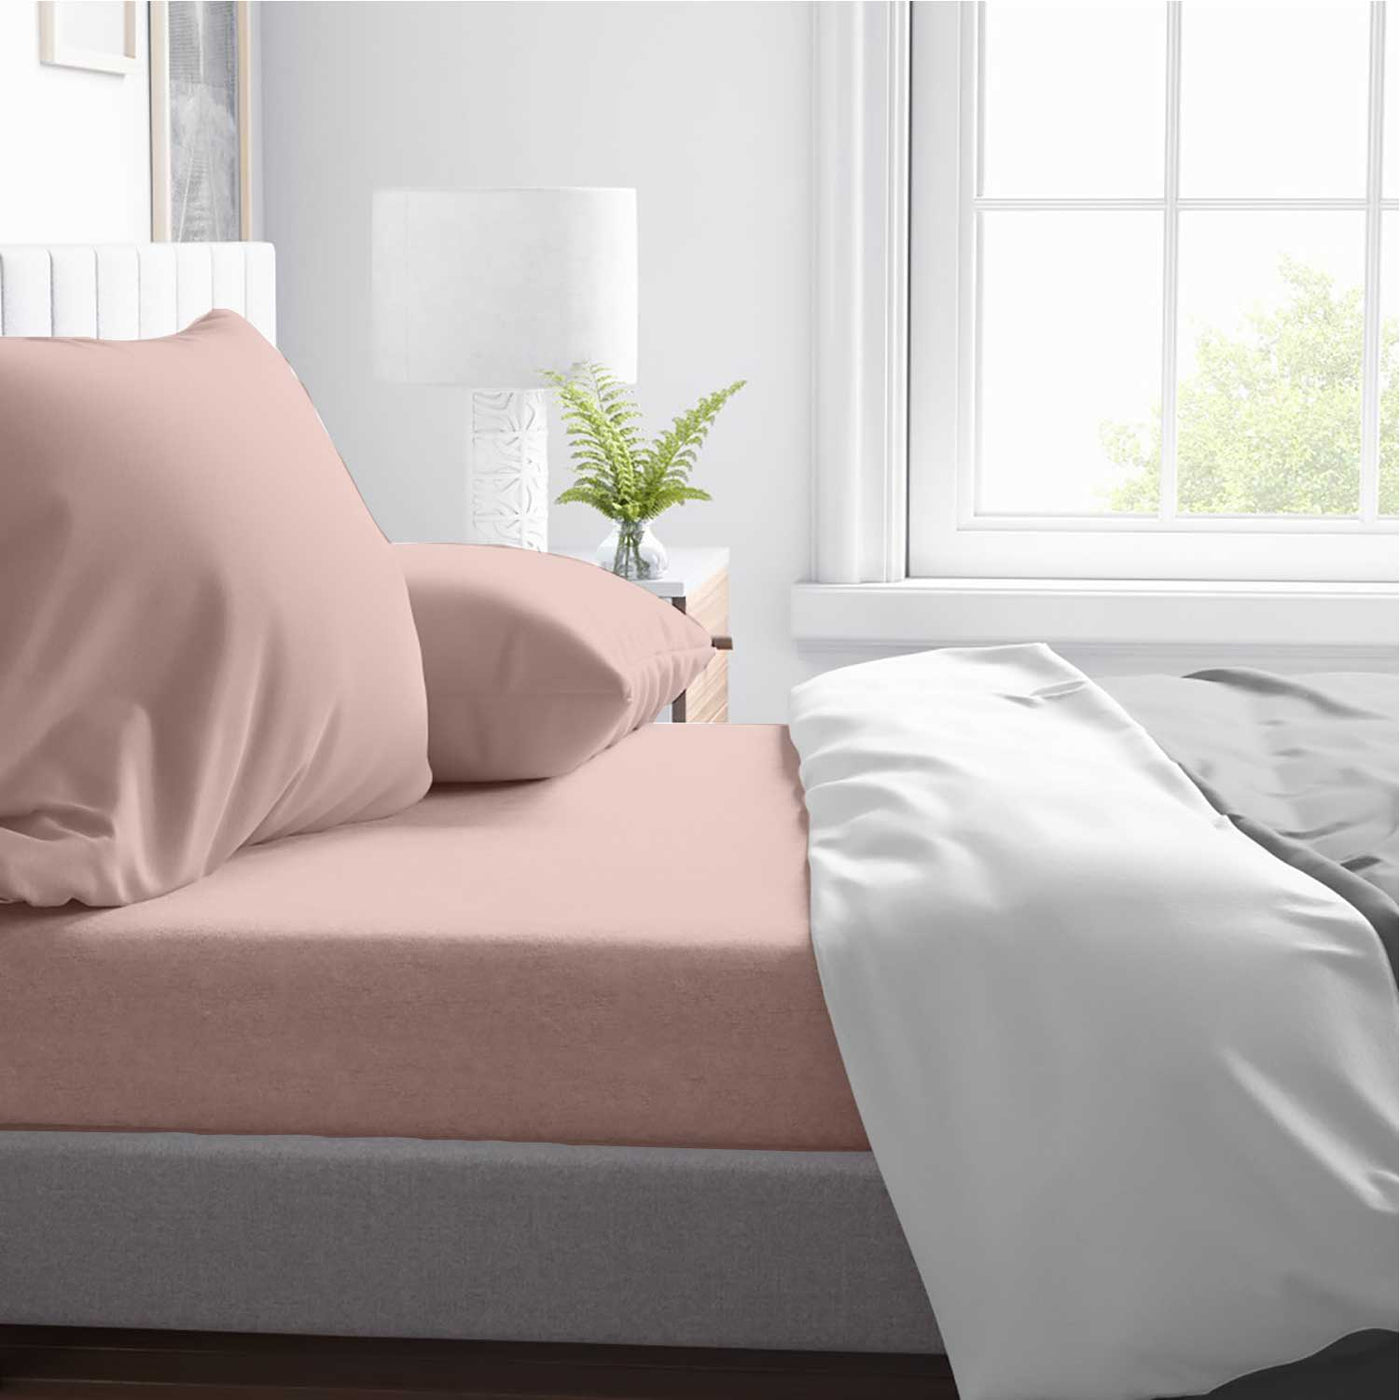 1 Piece Fitted Bed Sheet 100% Egyptian Cotton 600 Thread Count - Light Colors